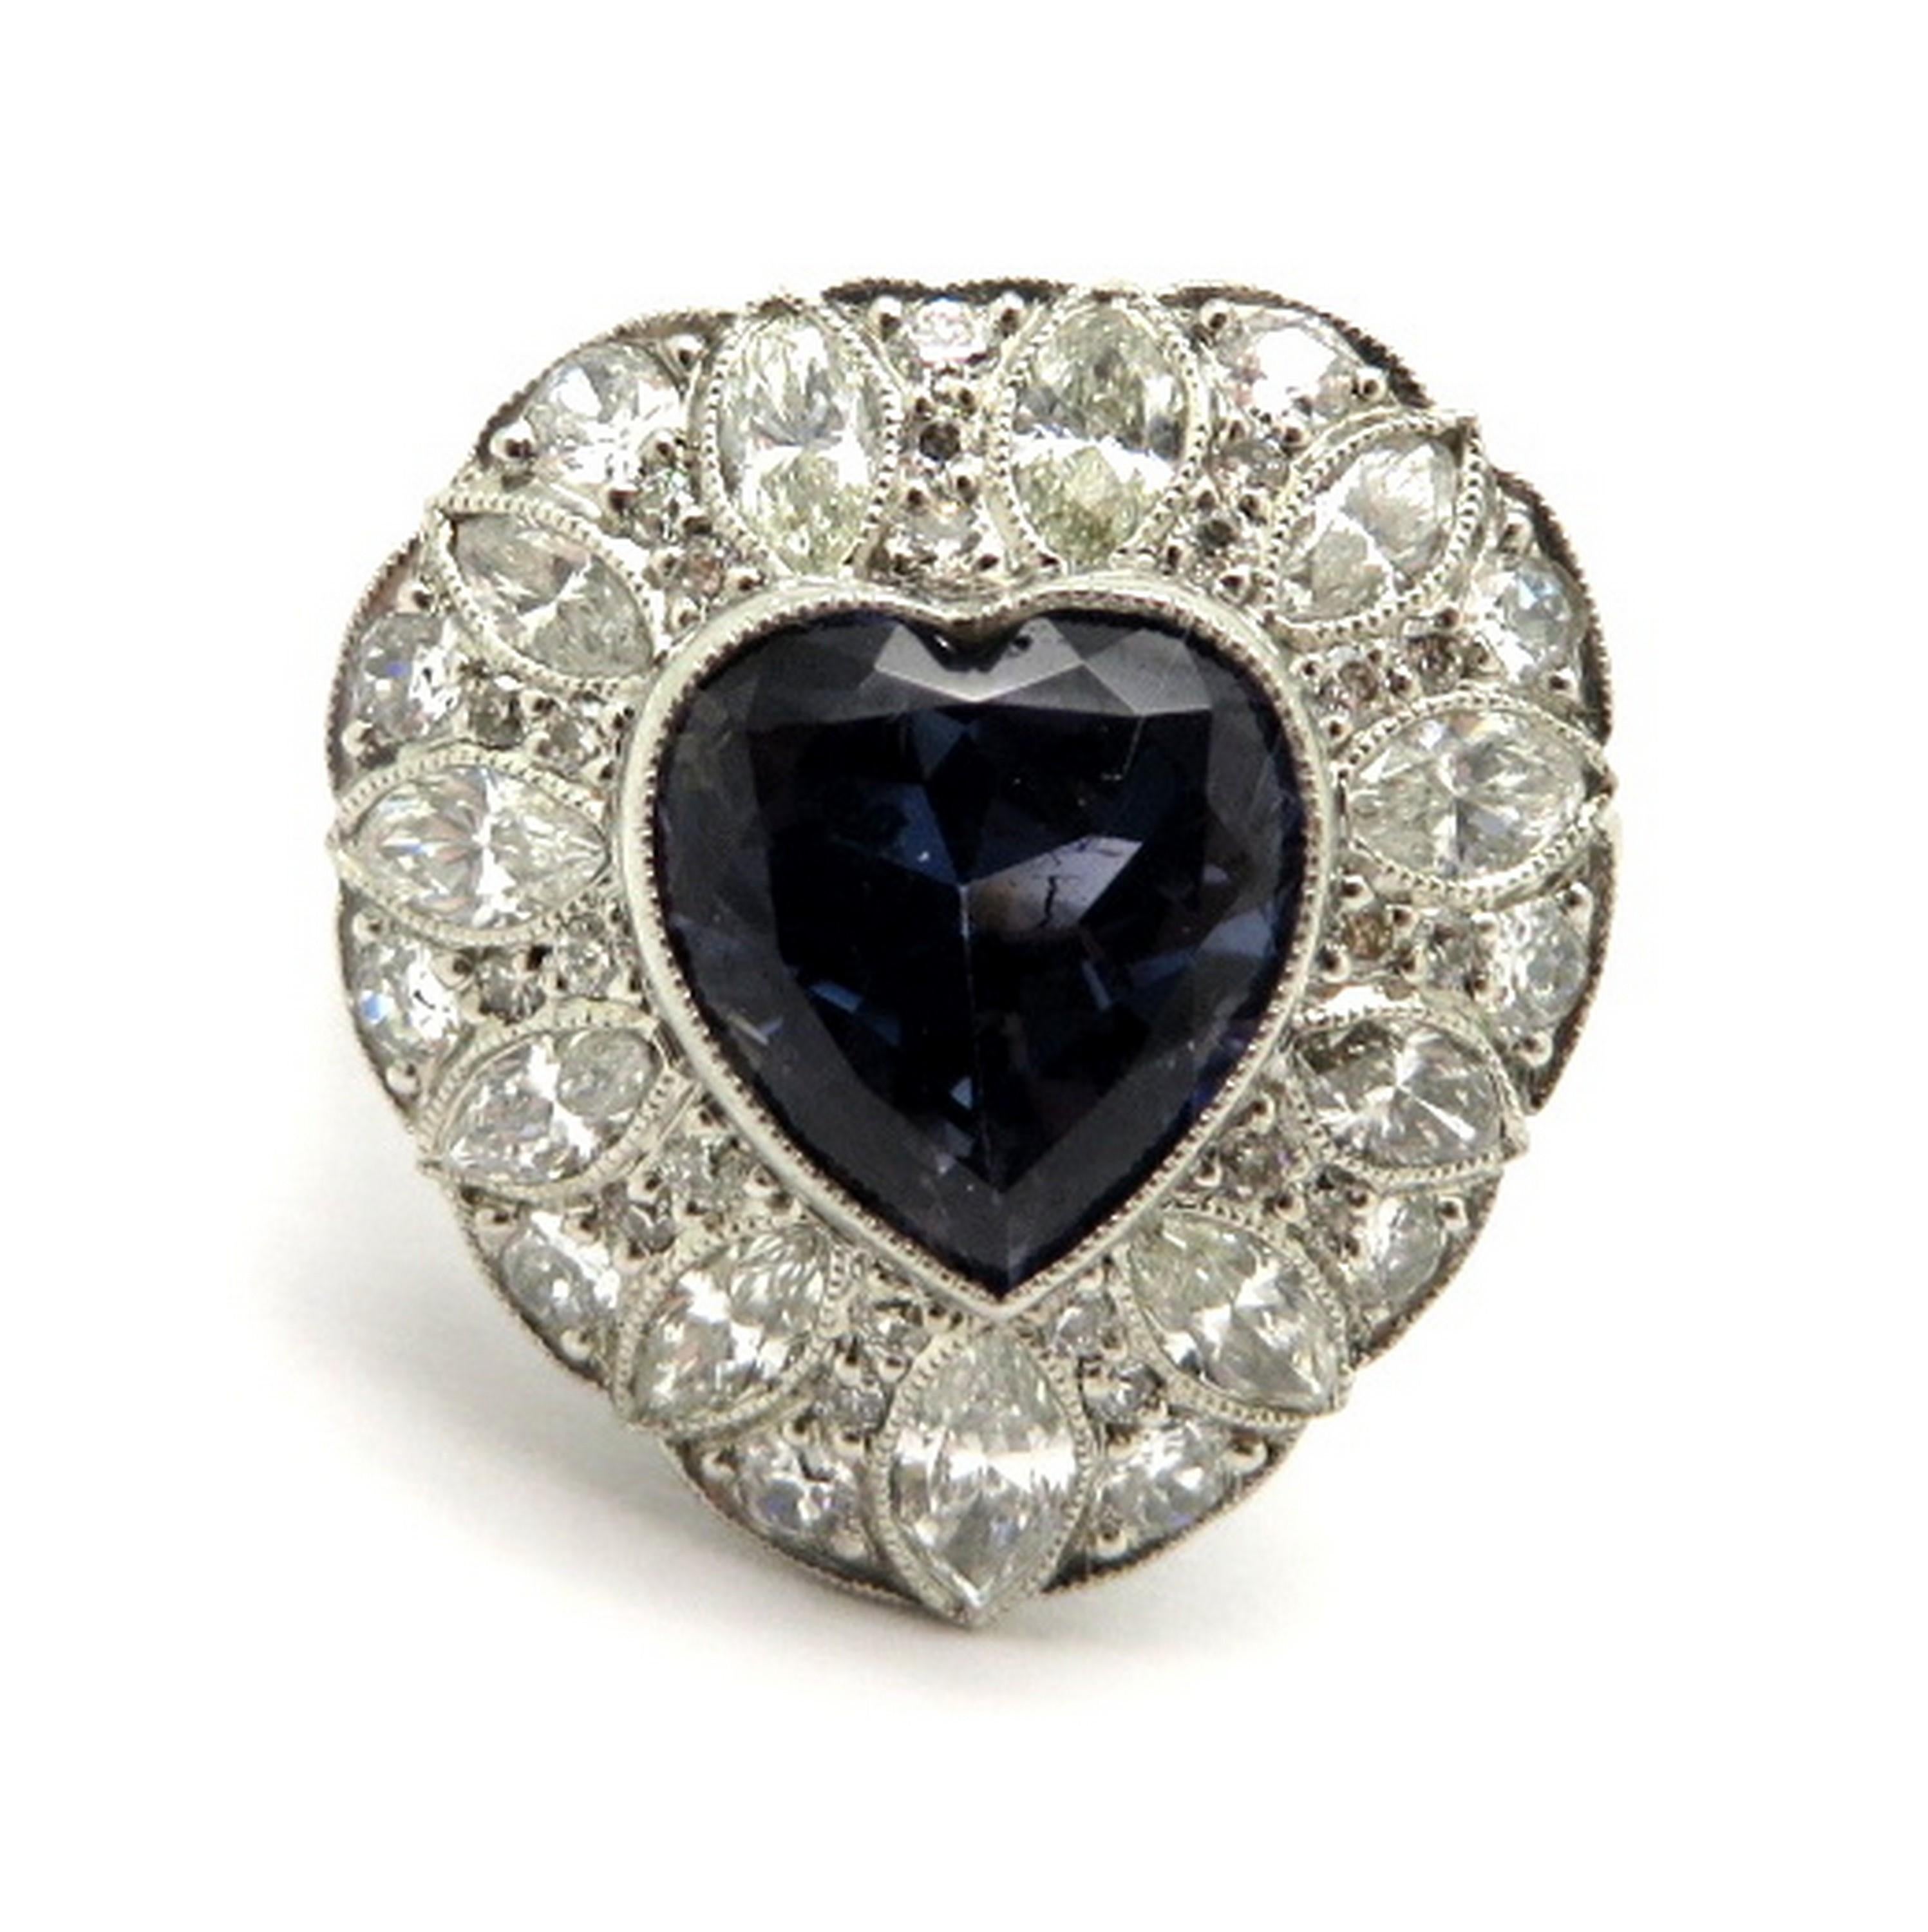 Platinum GIA certified Art Deco style 3.81 bluish Violet Sapphire heart diamond ring. Showcasing one heart shaped GIA certified bluish Violet Sapphire, milgrain bezel set, weighing approximately 3.81 carats. The GIA colored stone grading report is